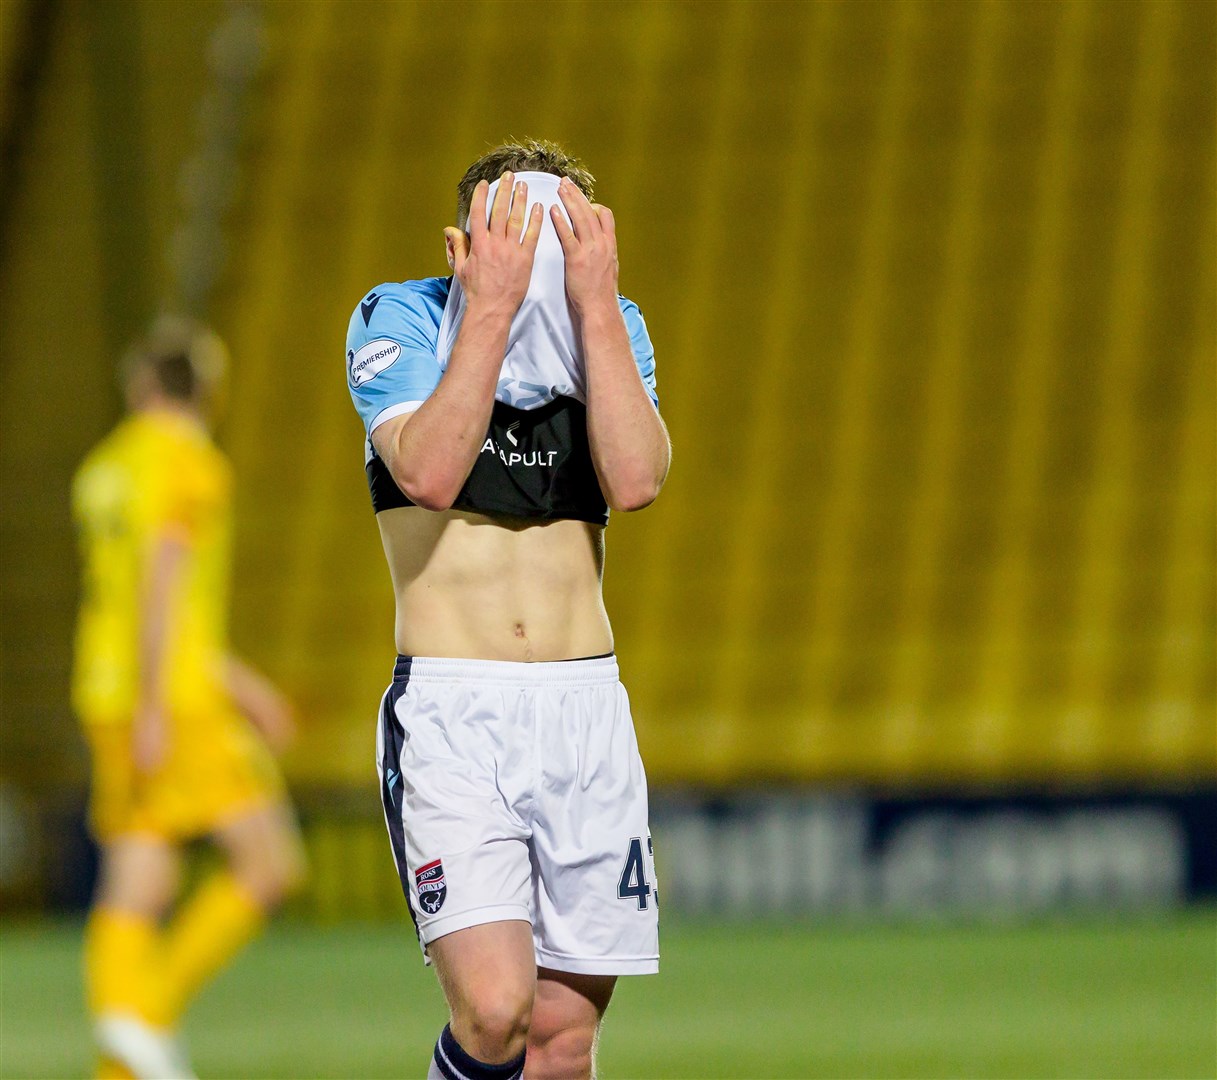 Josh Reid at full time after the 2-0 defeat at Livingston.